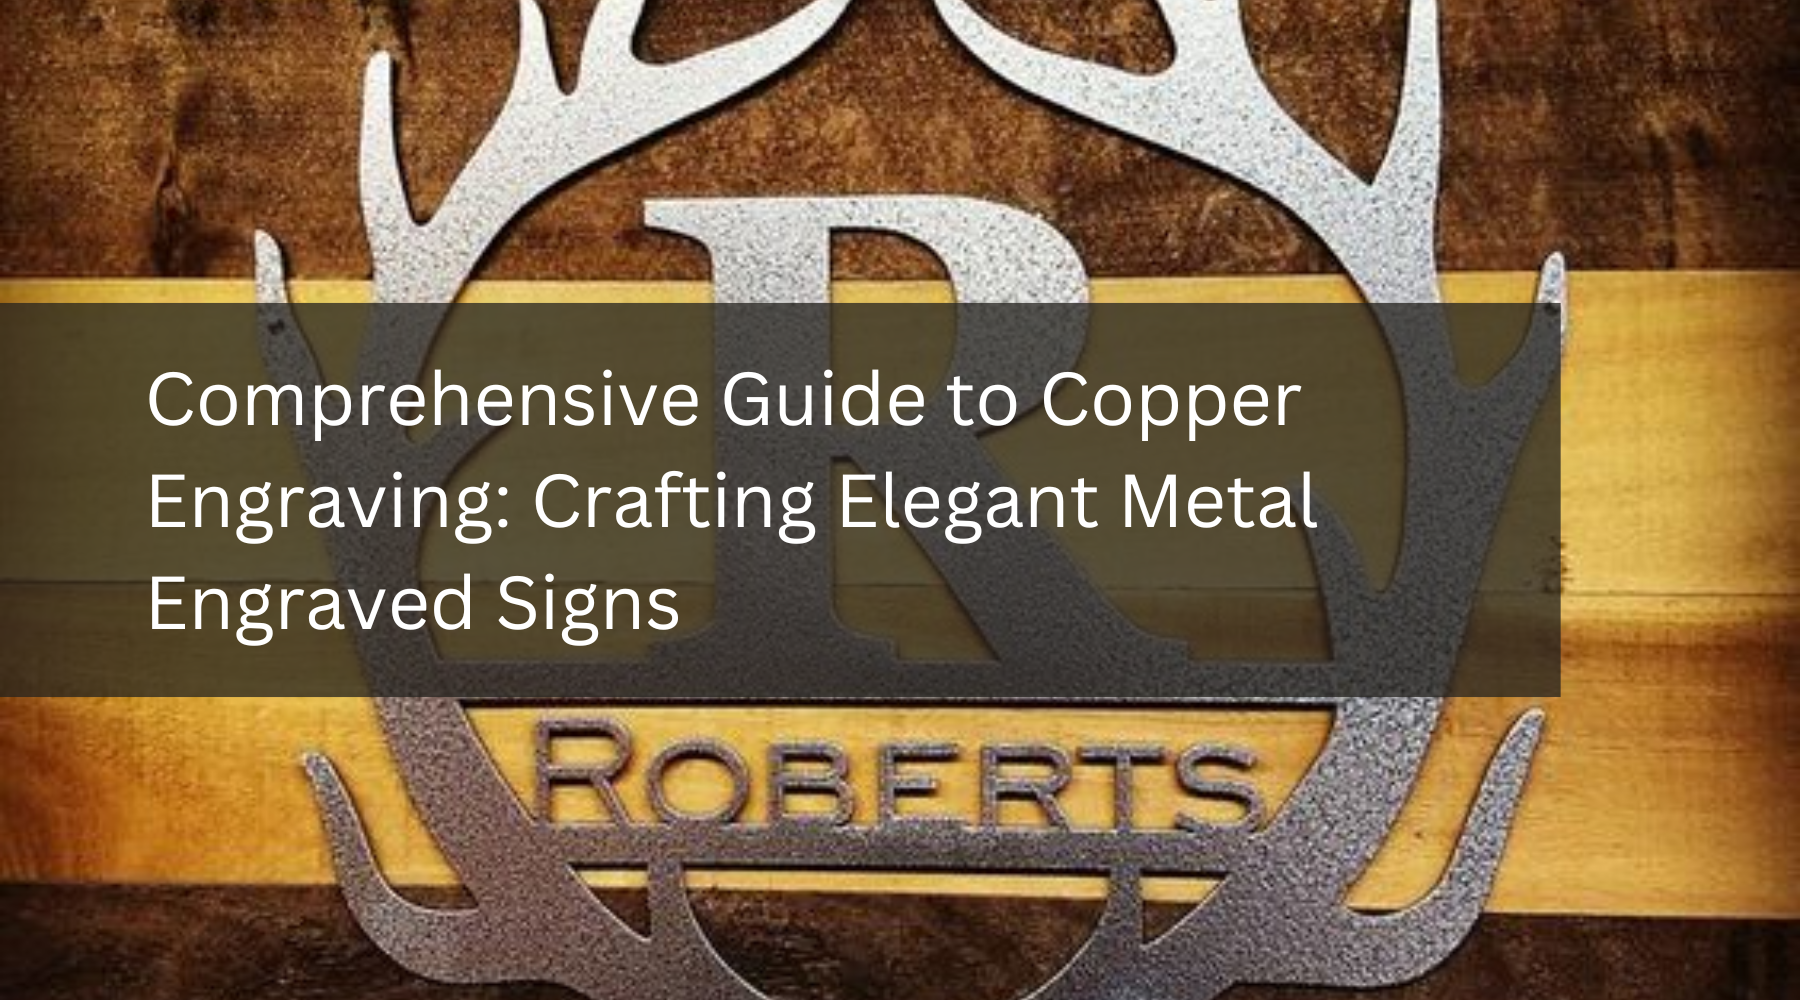 Comprehensive Guide to Copper Engraving: Crafting Elegant Metal Engraved Signs